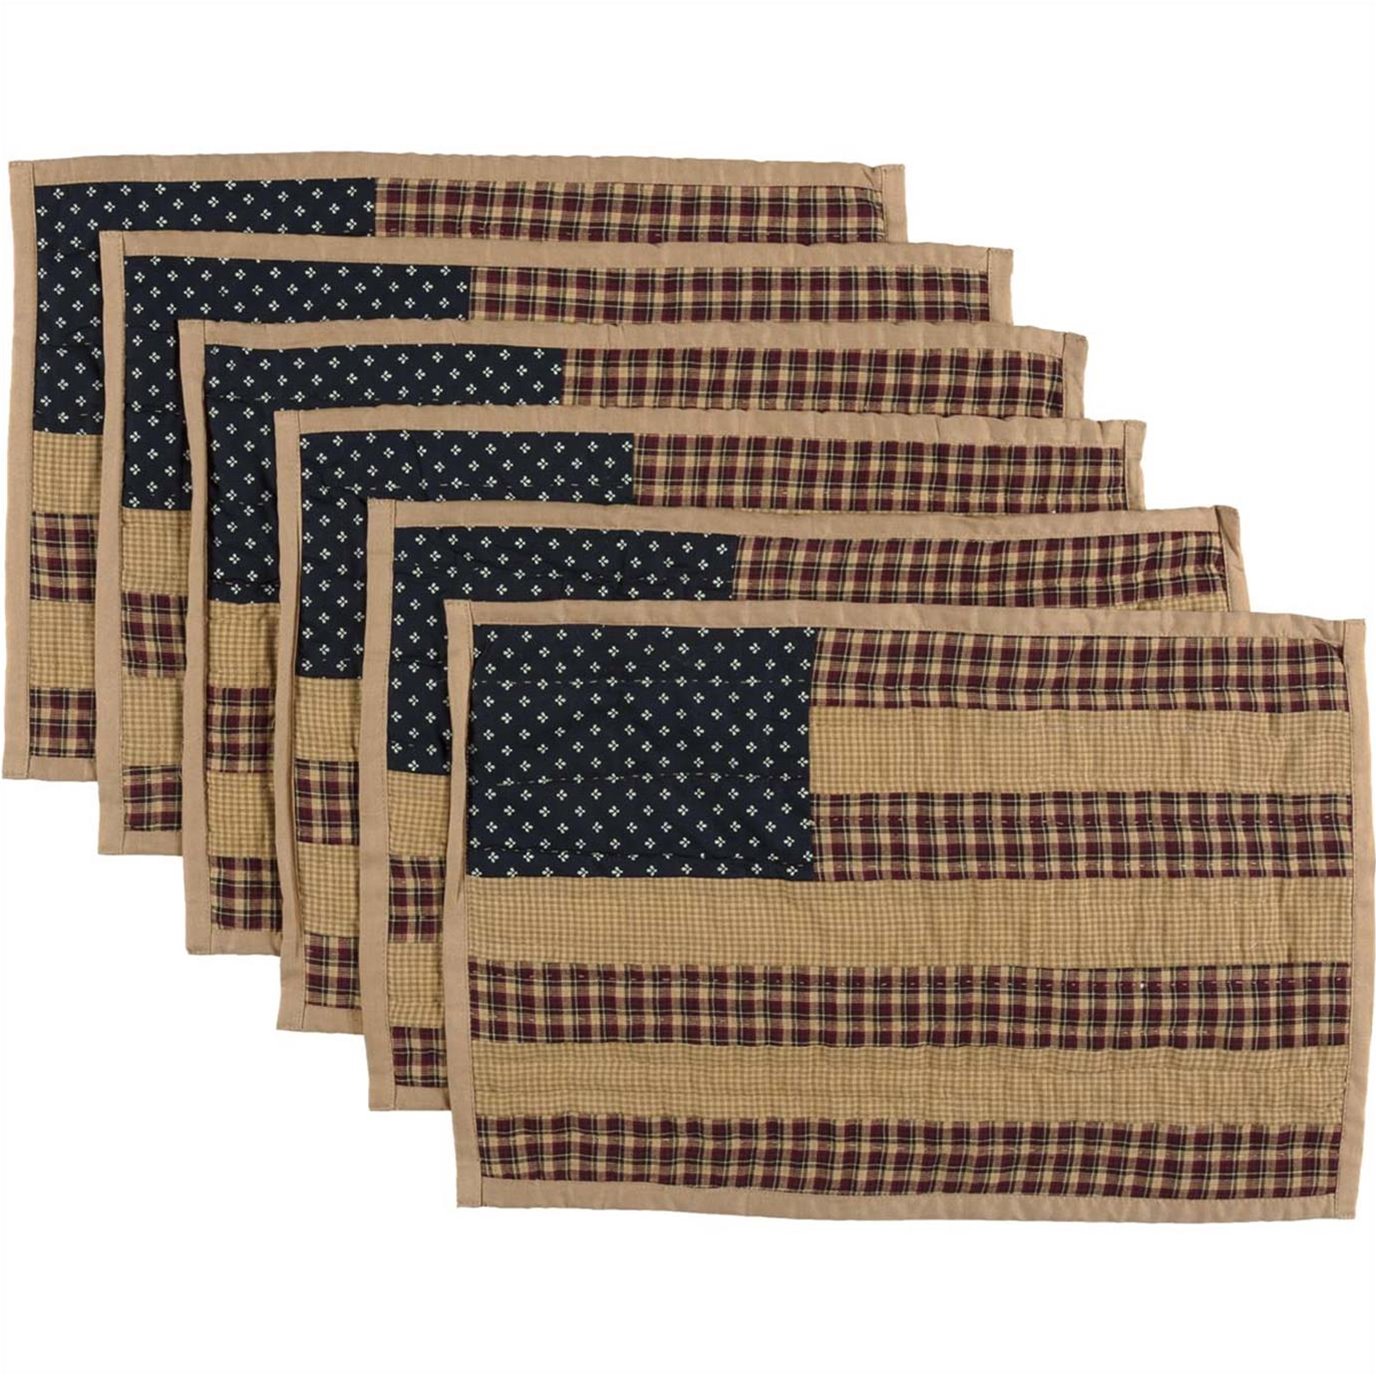 Patriotic Patch Placemat Quilted Set of 6 12x18